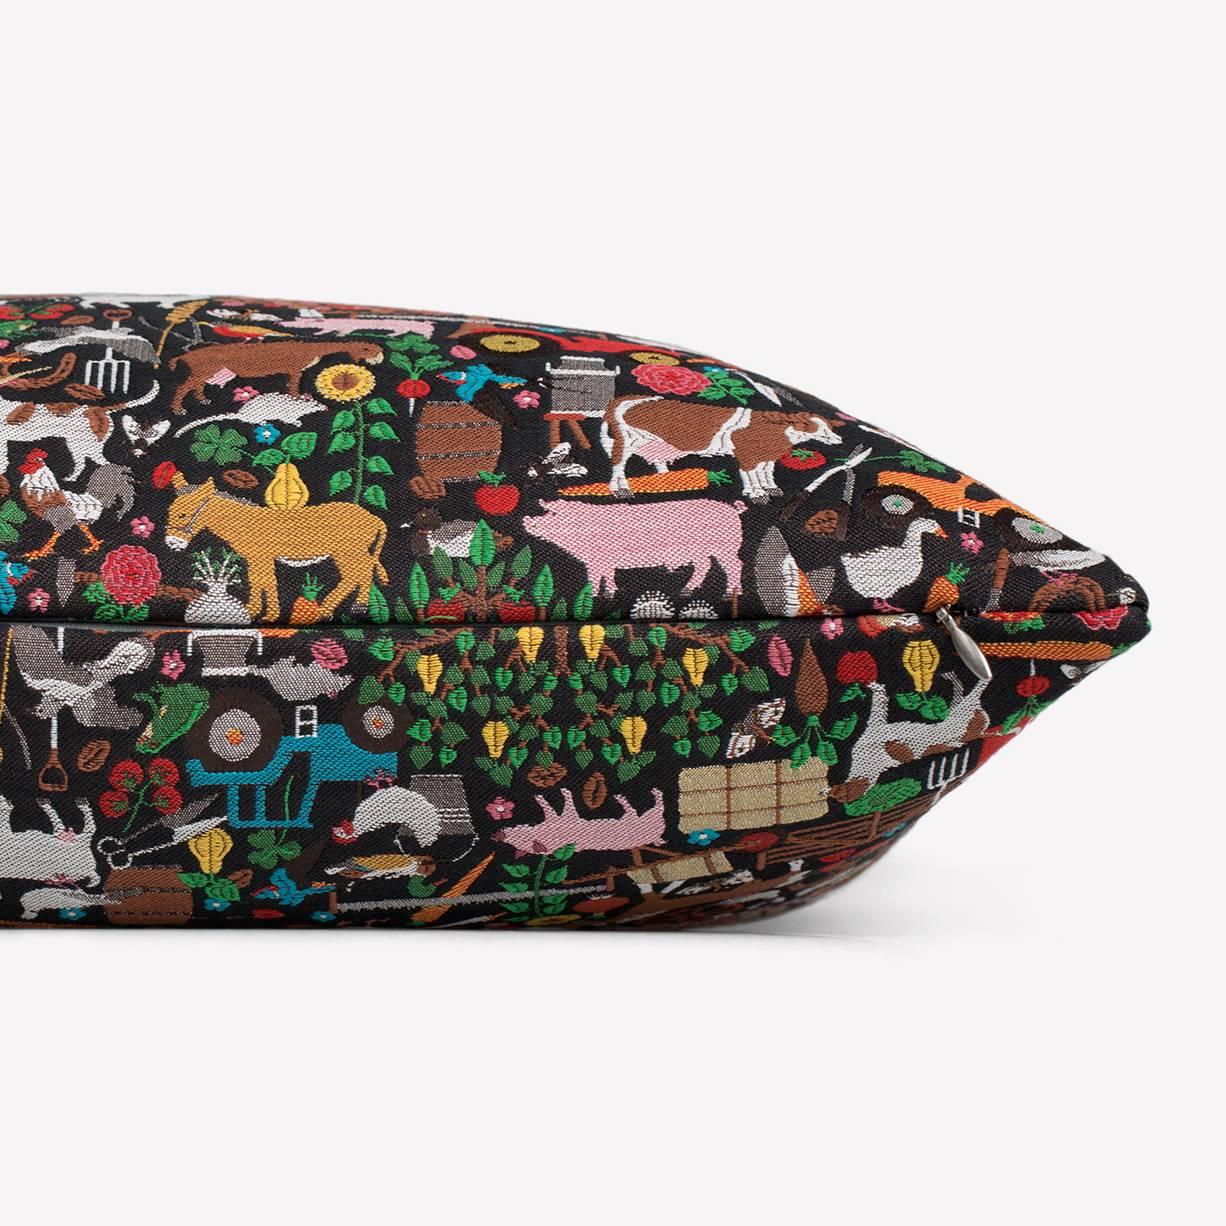 Maharam pillow
Bavaria by Studio Job
001 Unique

Based on a limited-edition Studio Job collection from 2008 consisting of five pieces of Indian rosewood furniture inlaid with vivid laser-cut marquetry, Bavaria depicts traditional farmland